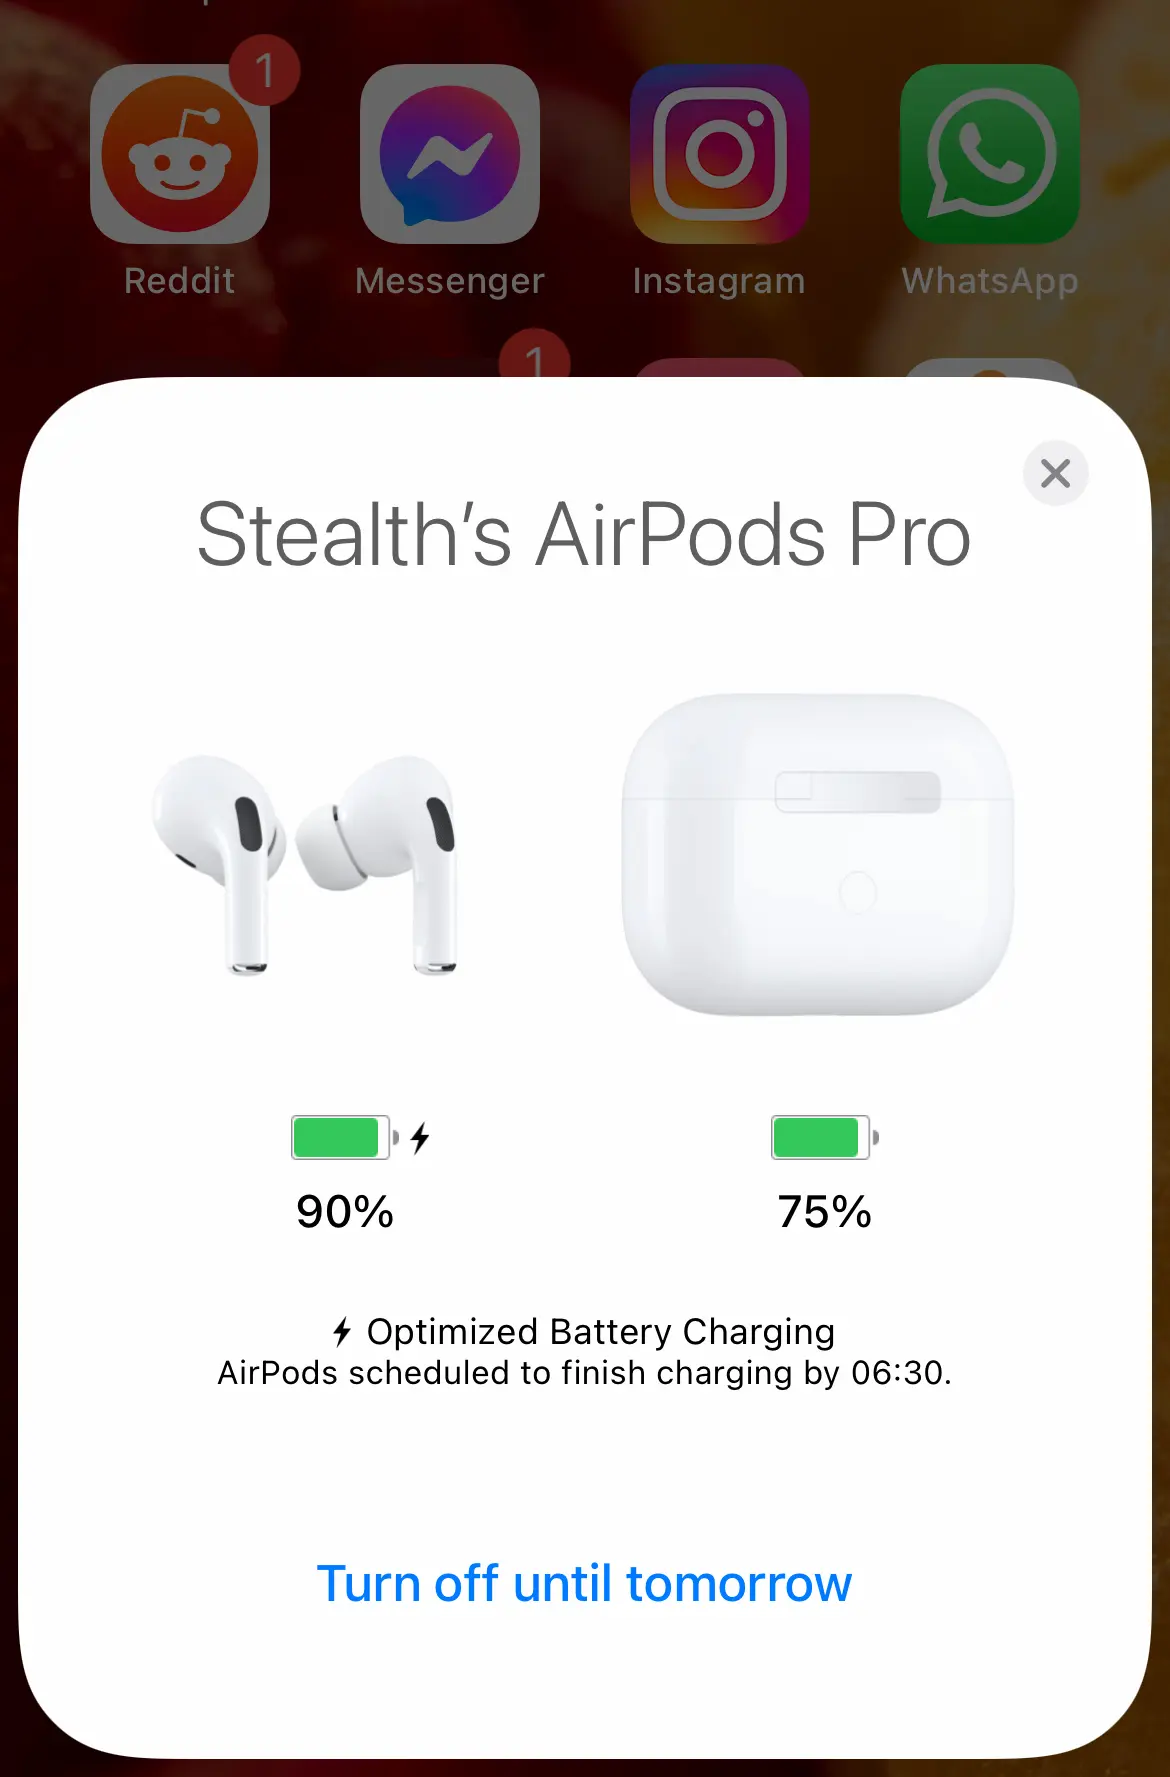 How do you increase battery life? AirPods